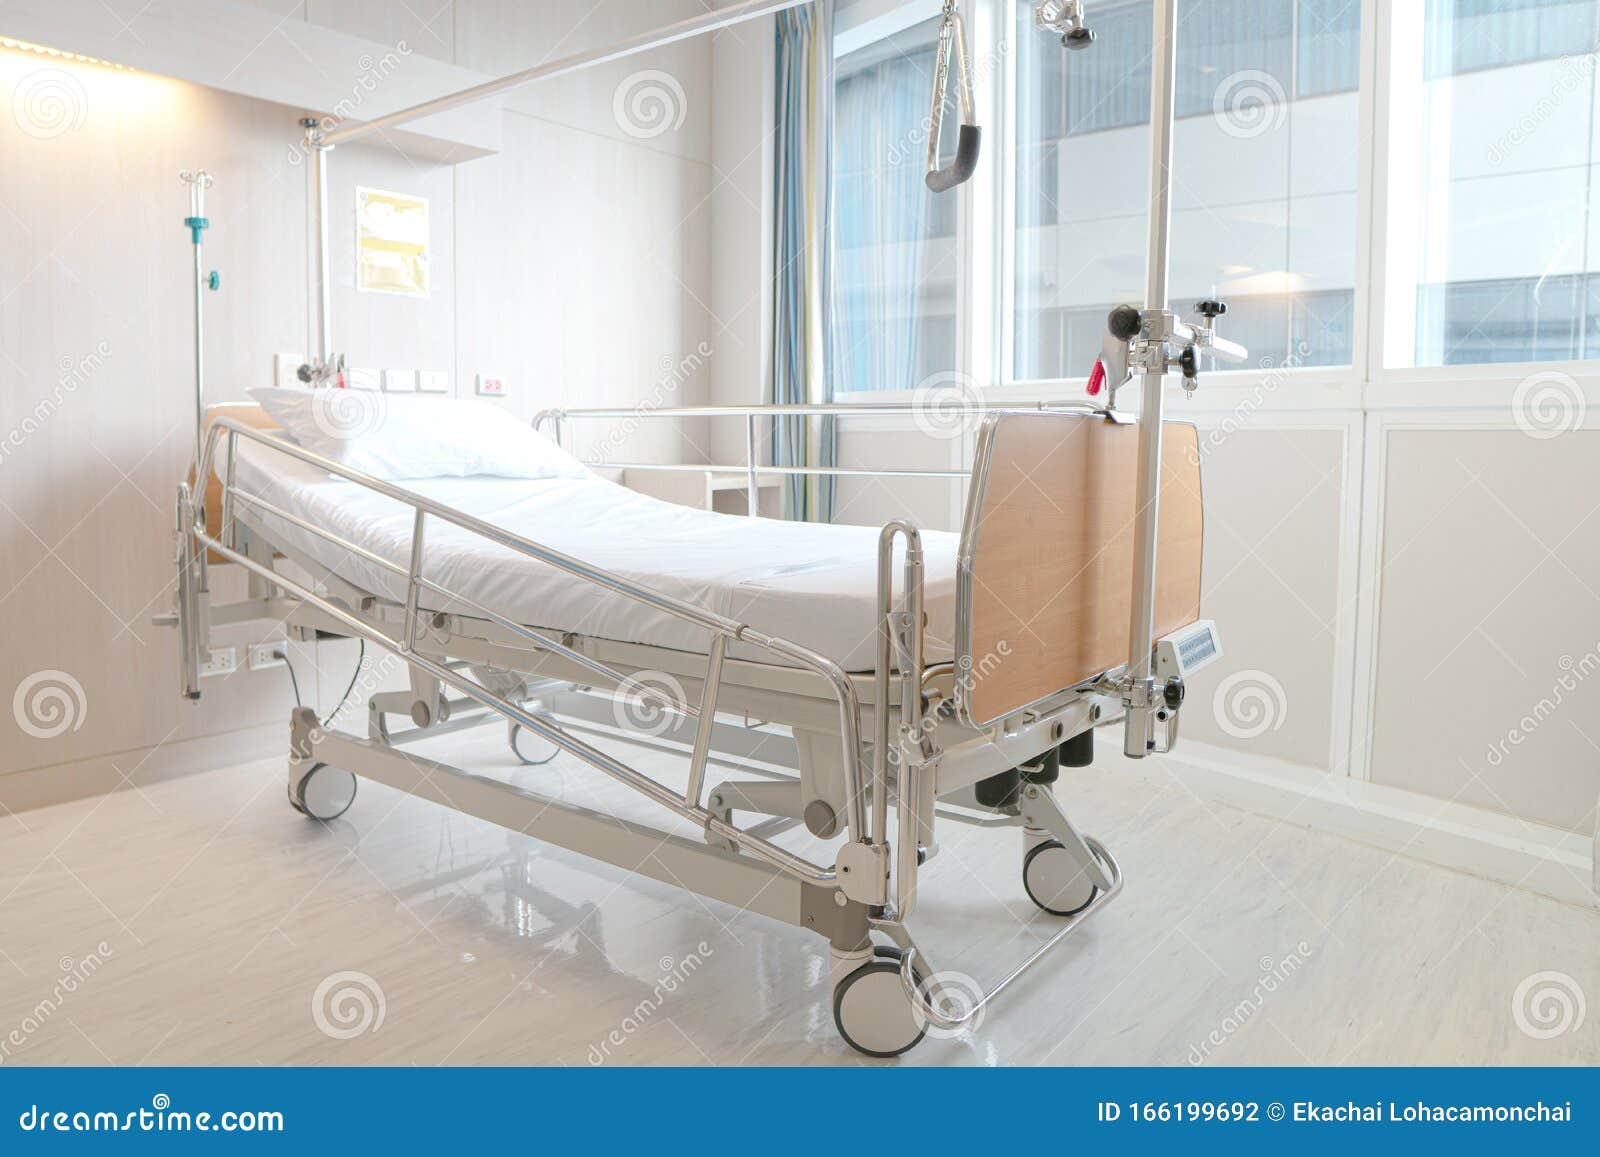 Focus Background of Electrical Adjustable Patient Bed in Hospital Room  Stock Photo - Image of hospital, automatic: 166199692